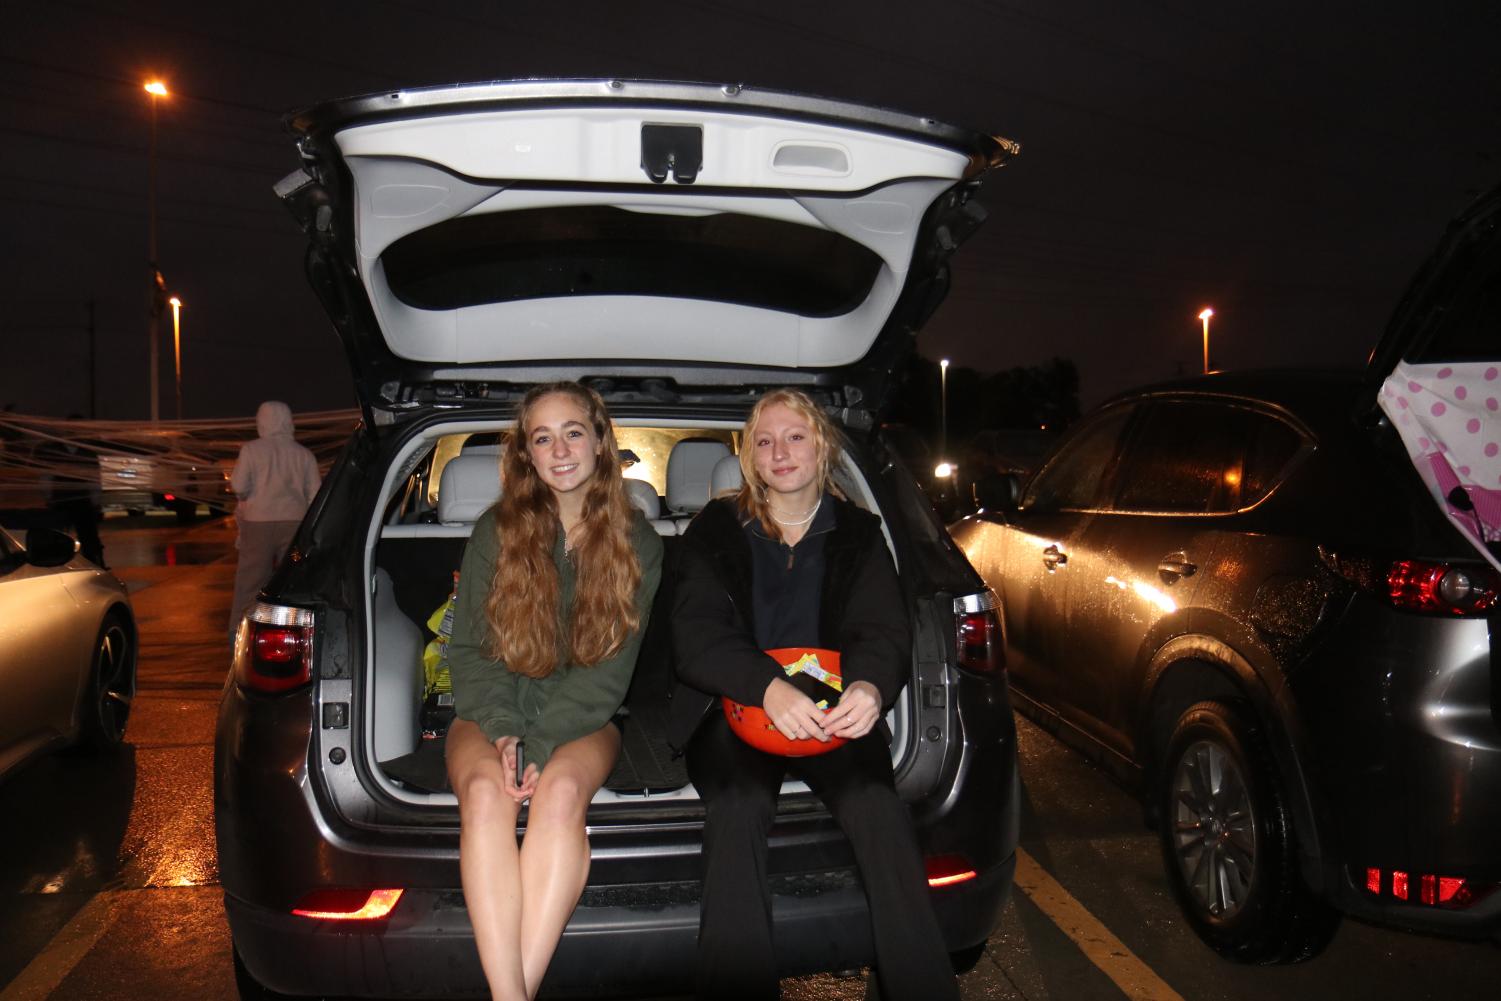 MHS+Students+Celebrate+Halloween+at+Trunk+or+Treat